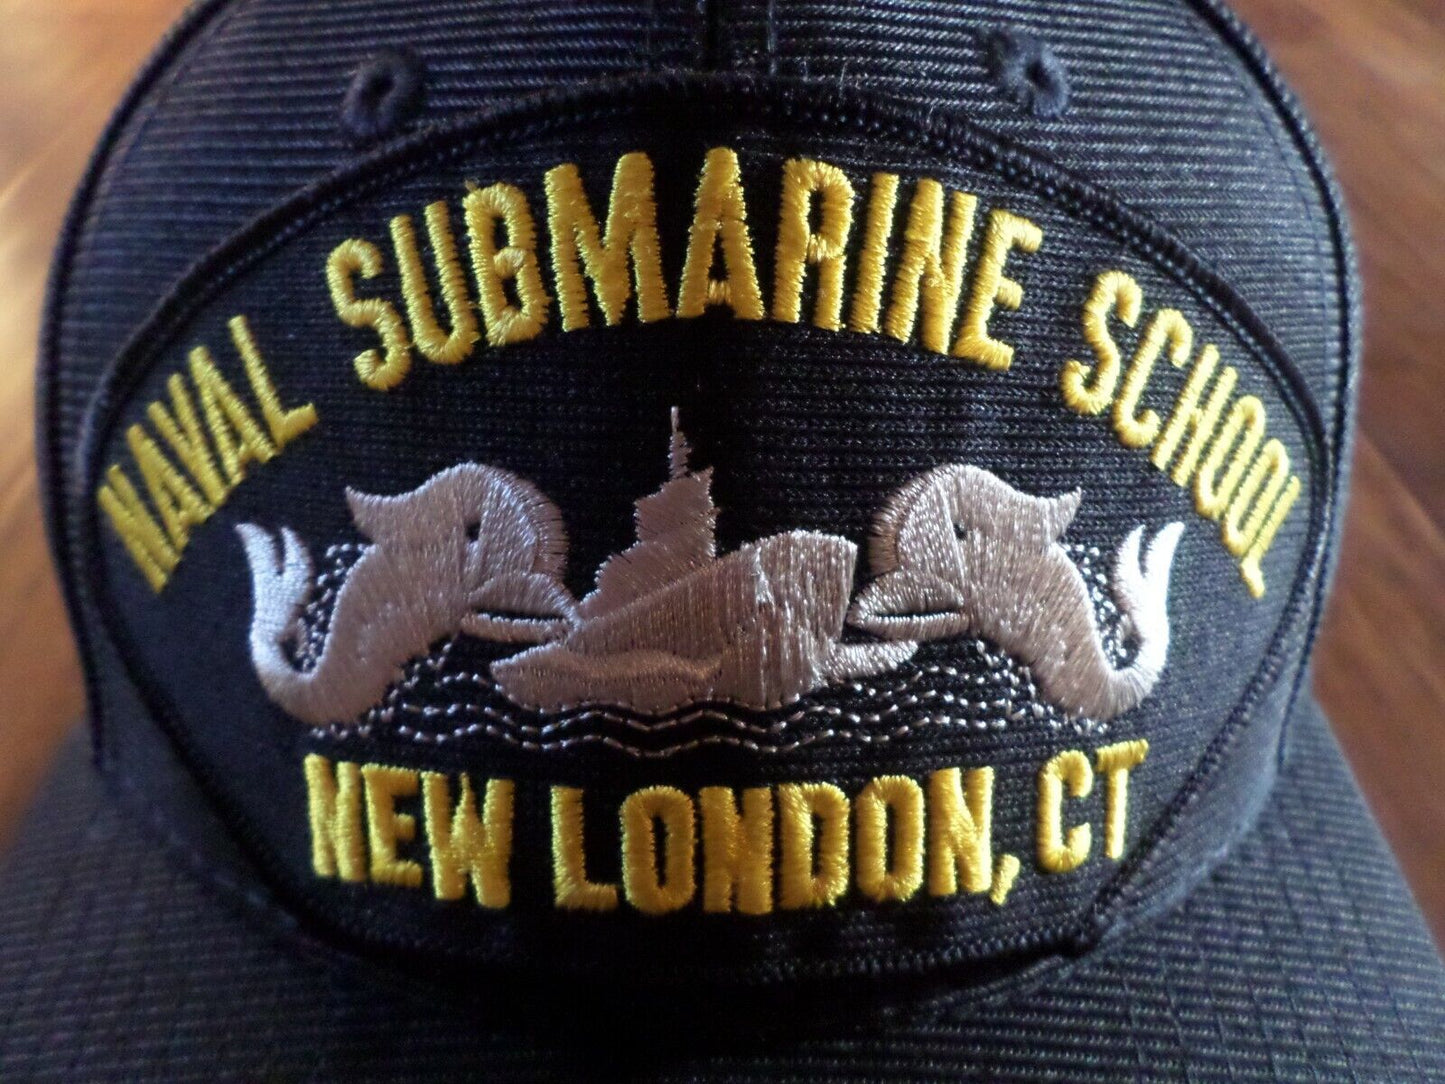 NAVAL SUBMARINE SCHOOL NEW LONDON CT HAT OFFICIAL U.S MILITARY BALL CAP USA MADE